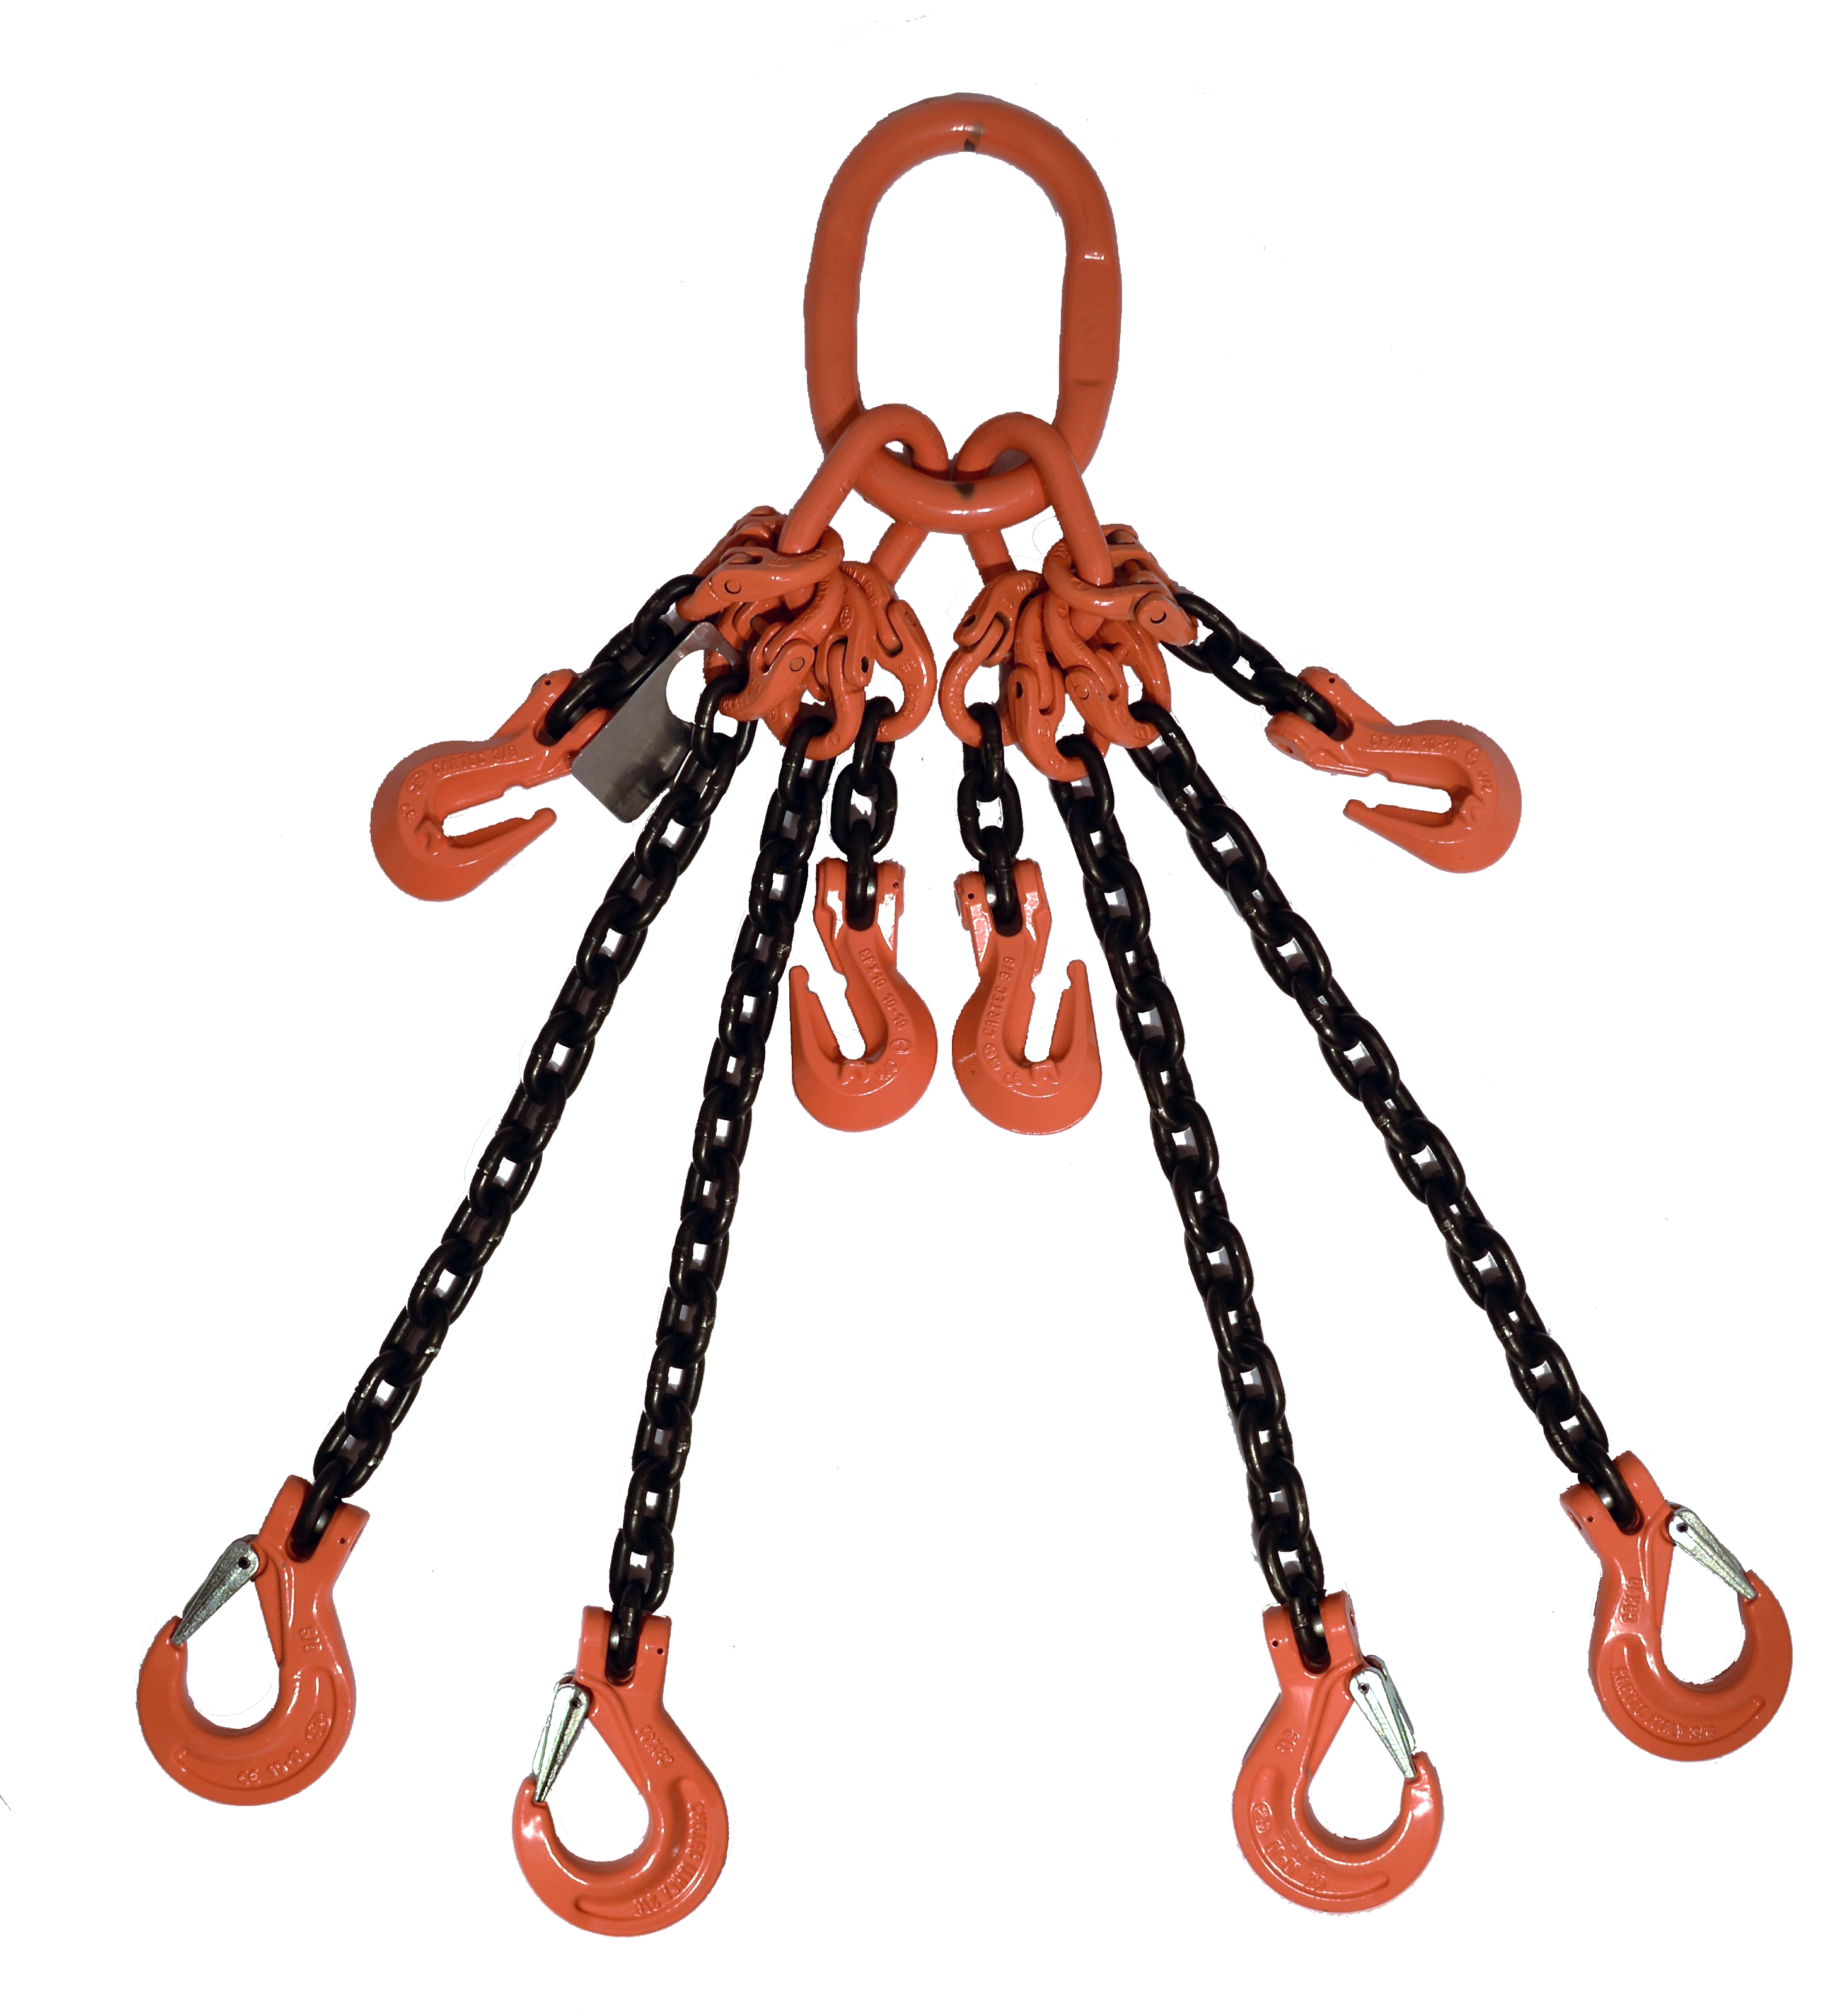 5 Important Considerations to Keep in Mind When Looking for Lifting Chain Slings